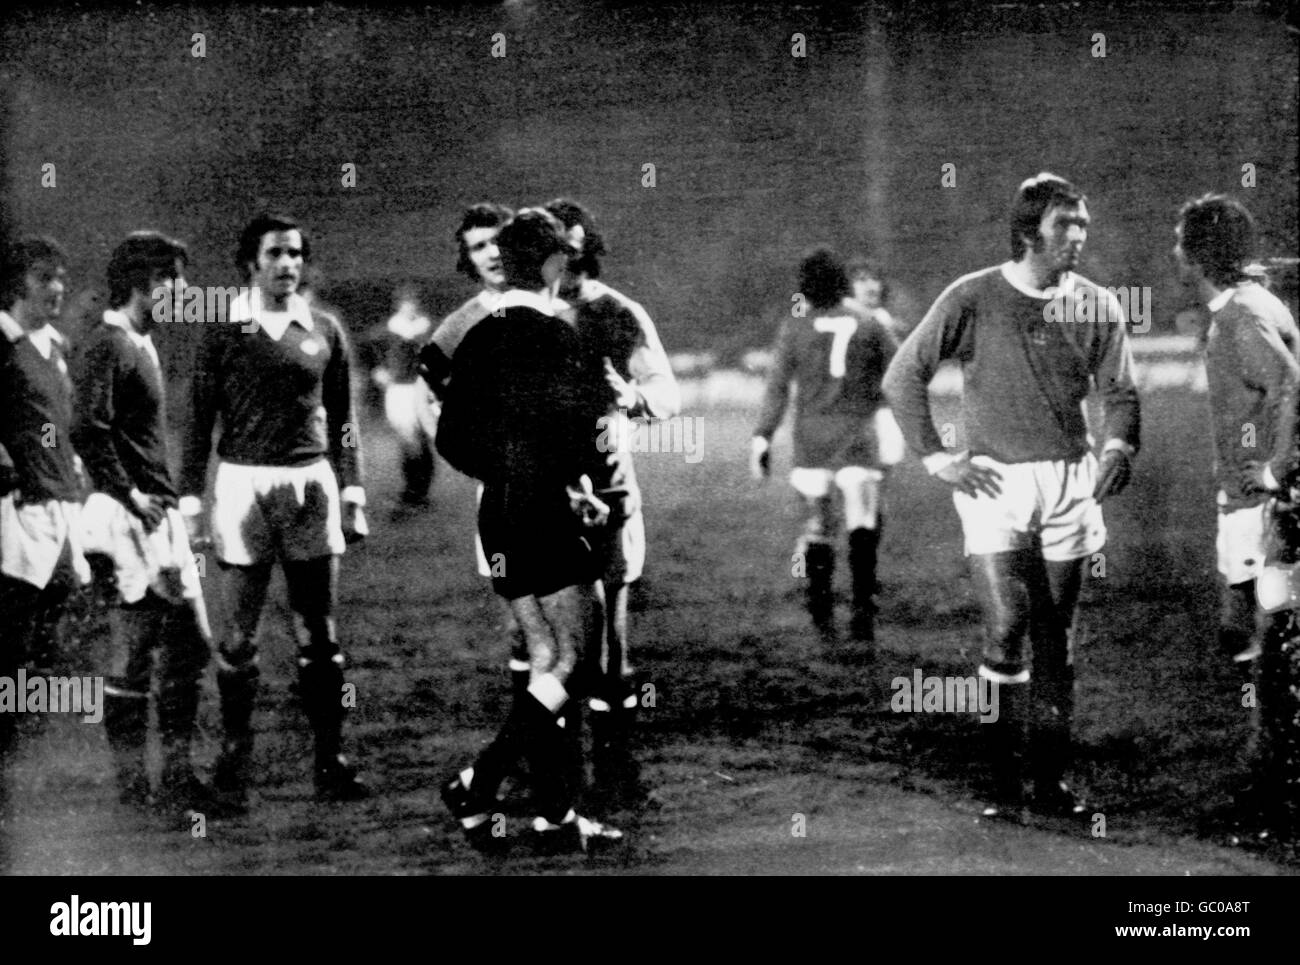 Manchester City's Mike Summerbee (third r) argues with referee Clive Thomas (fifth l) after the official sent off City's Mike Doyle (fourth l) and United's Lou Macari (out of pic), watched by United's Stewart Houston (l), Martin Buchan (second l) and George Graham (third l), and City's Alan Oakes (second r) and Dennis Tueart (r). The dismissed players refused to leave the field, prompting Thomas to take all the players off until the game could restart with both teams down to ten men Stock Photo